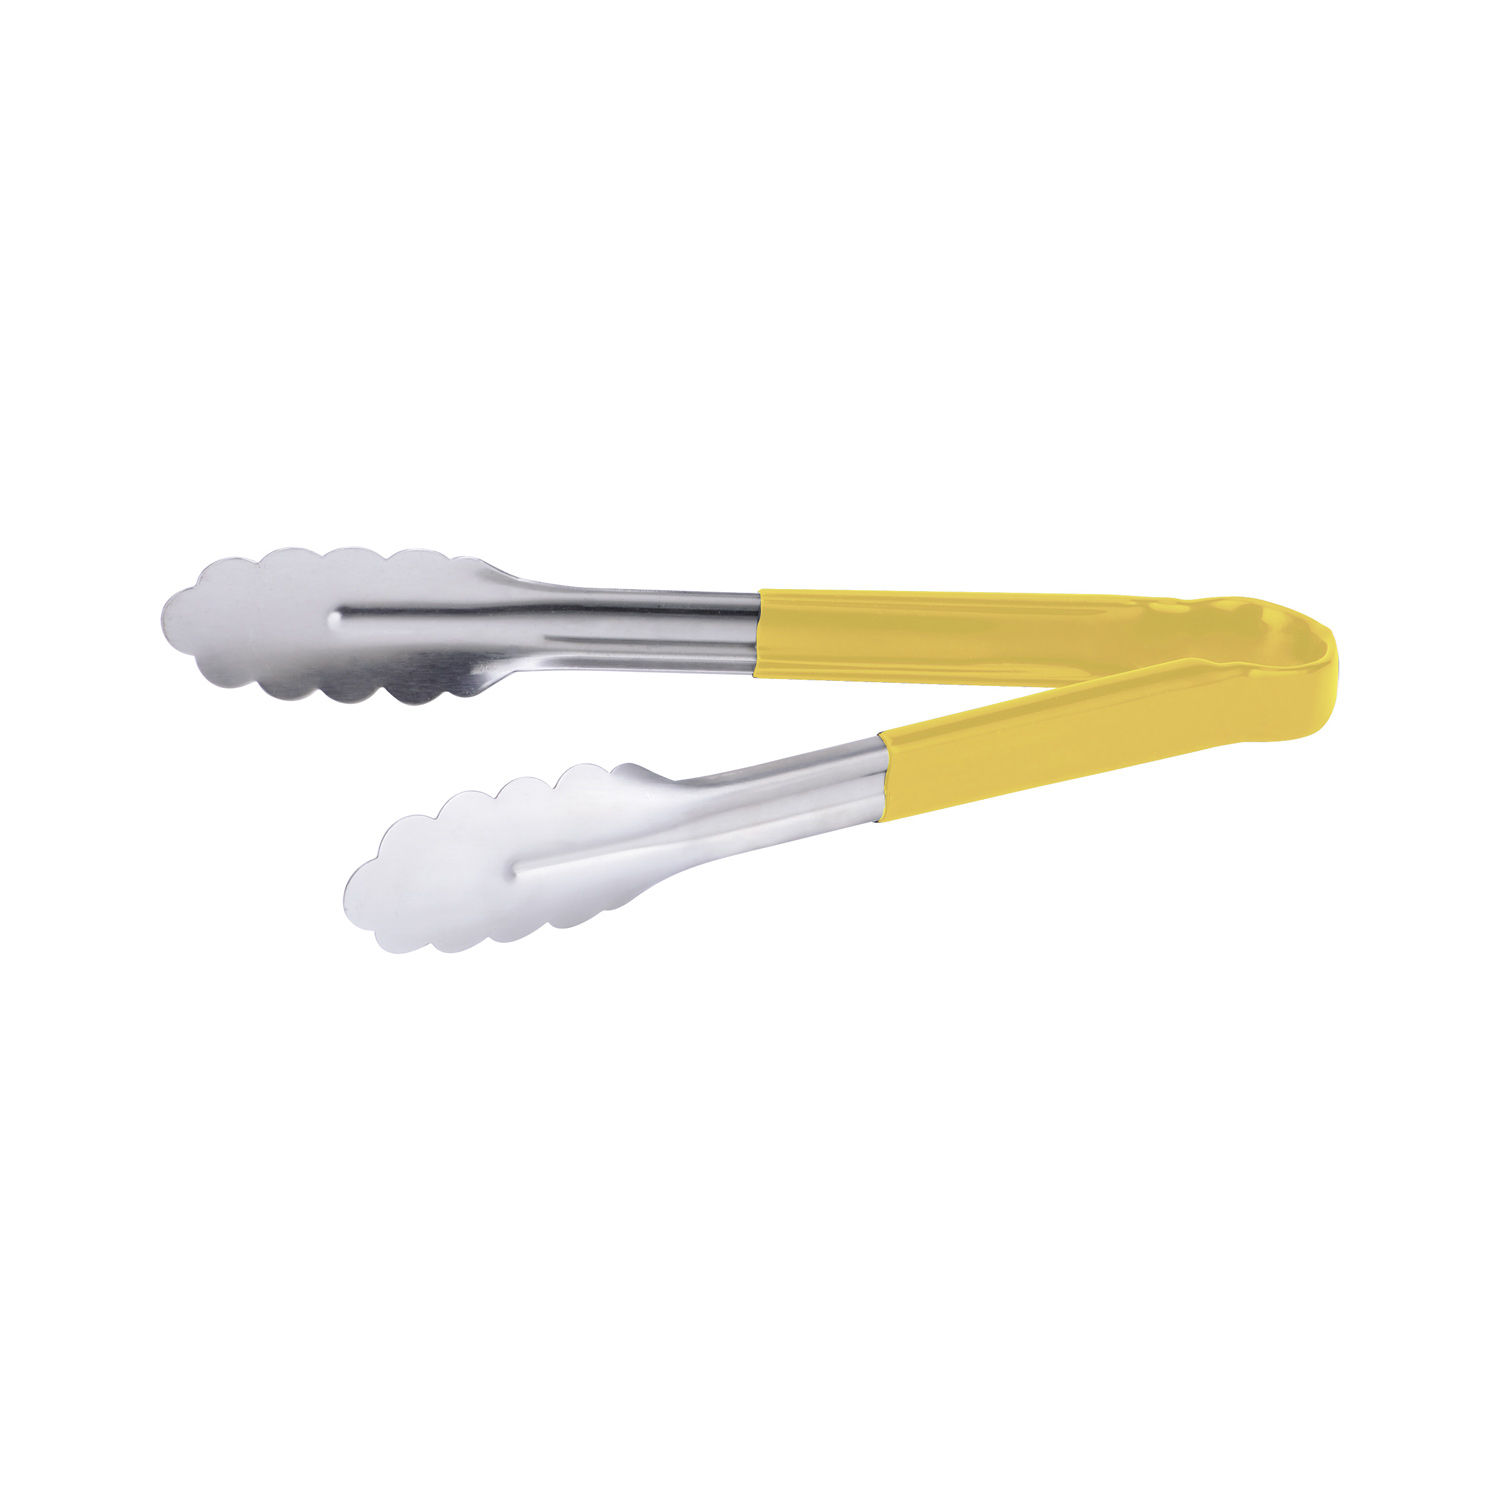 CAC China STCH-10YL Stainless Steel Tongs with Yellow Handle 10"